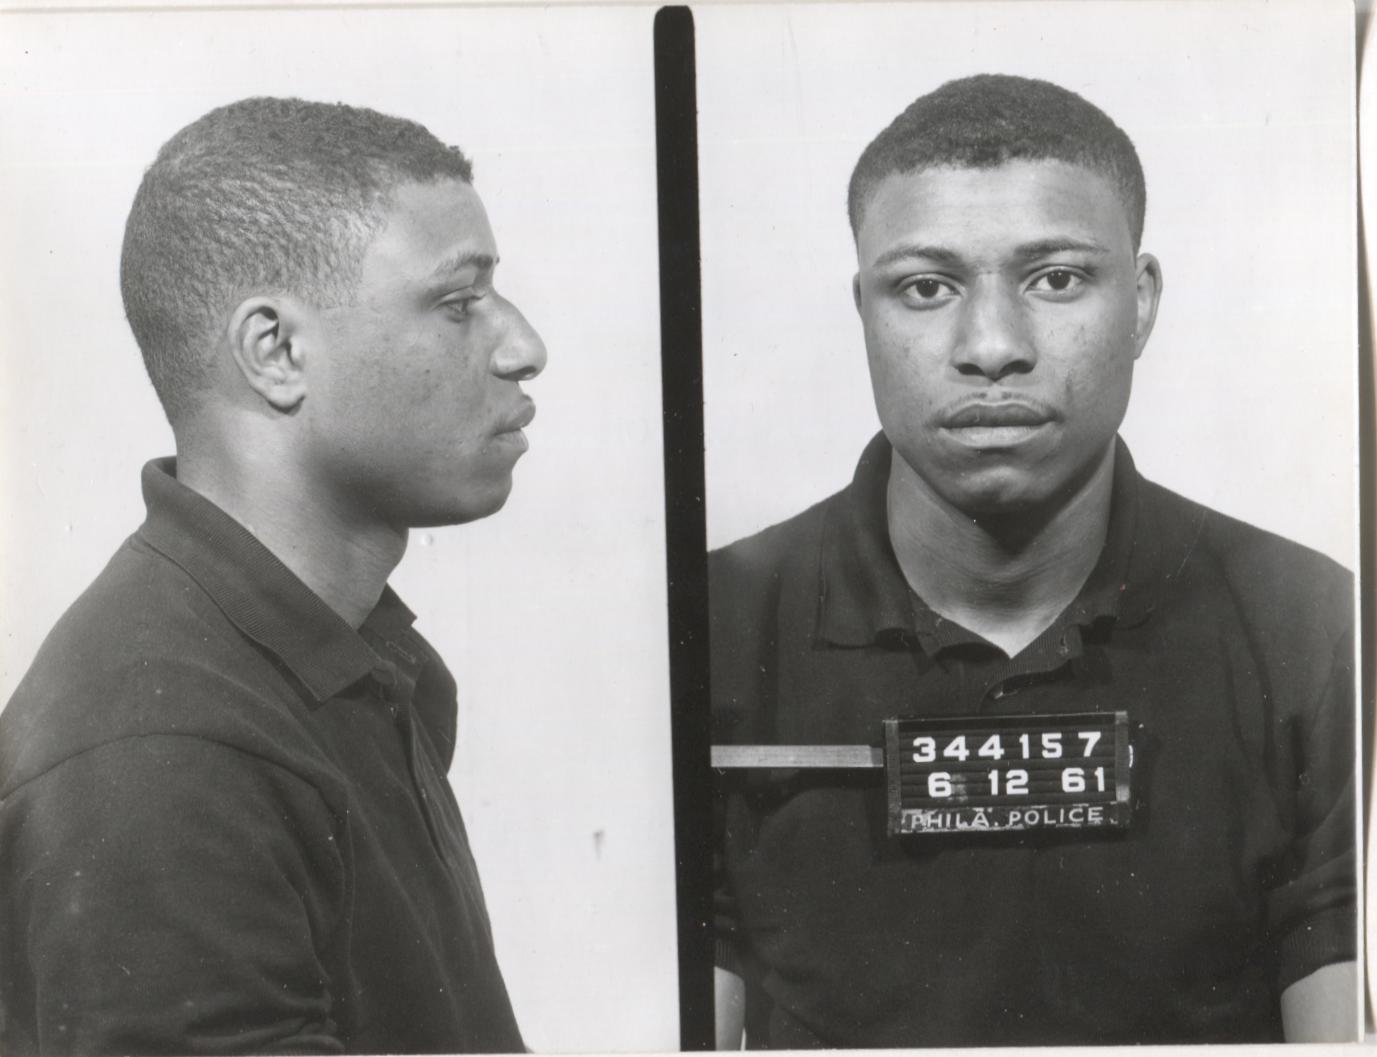 Rudolph Wilson Mugshot - Arrested on 6/12/1961 for Illegal Lottery